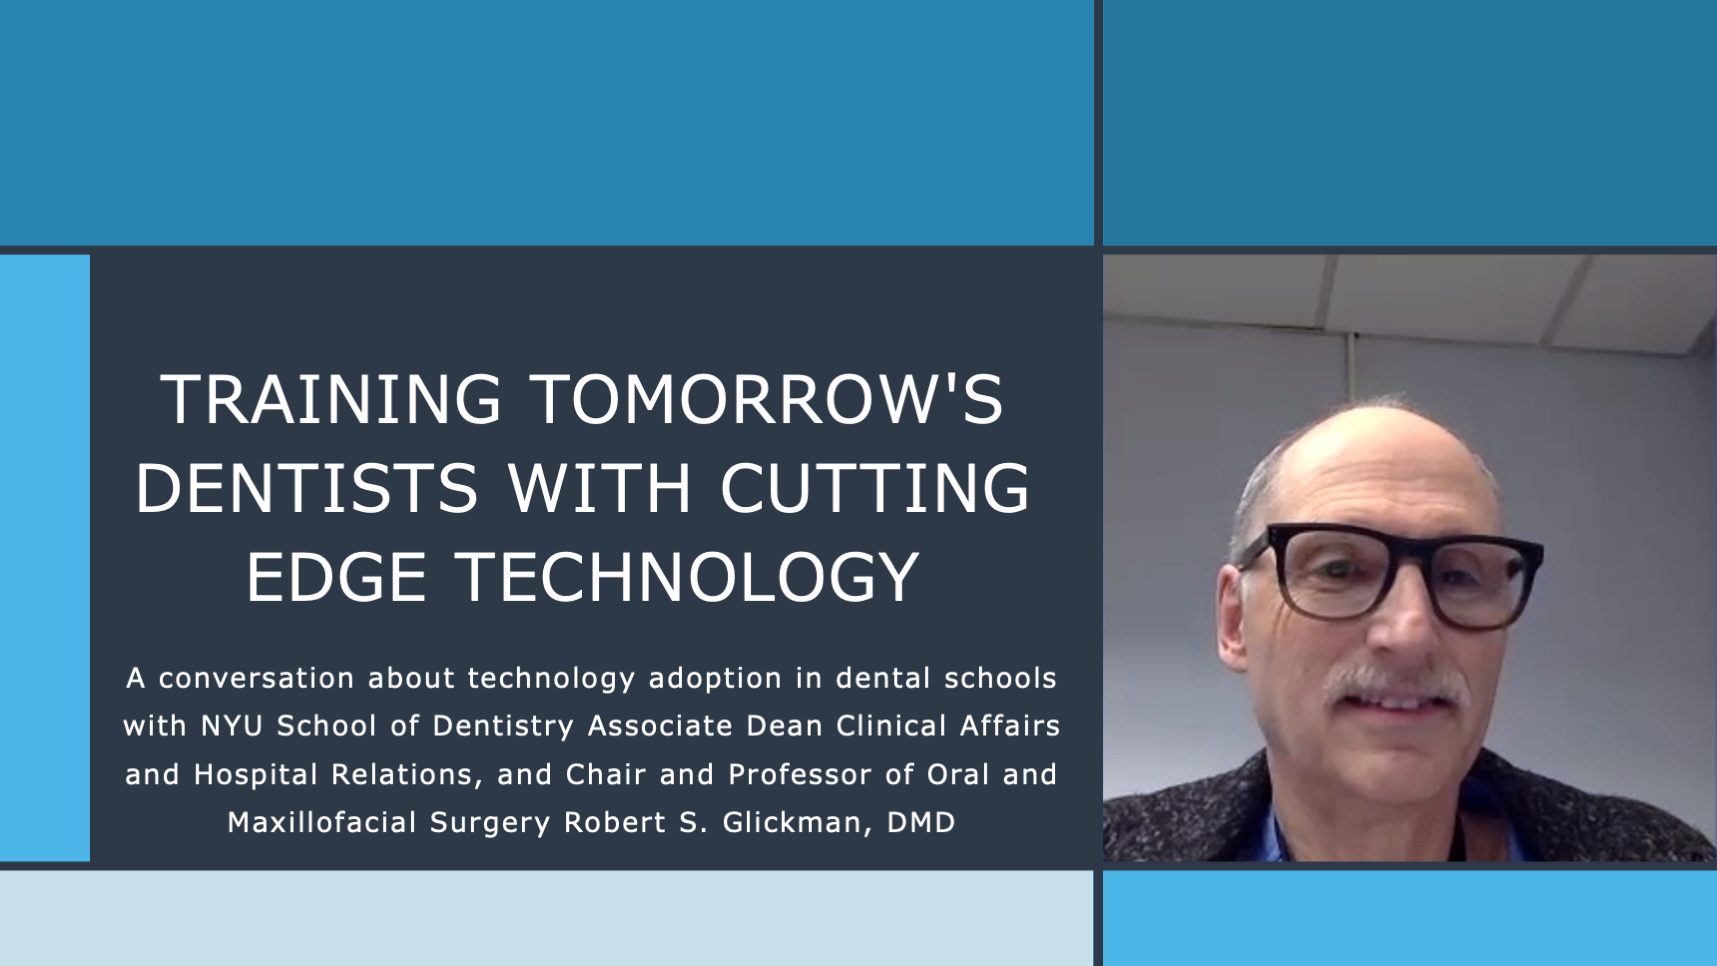 Training Tomorrow's Dentists with Cutting Edge Technology